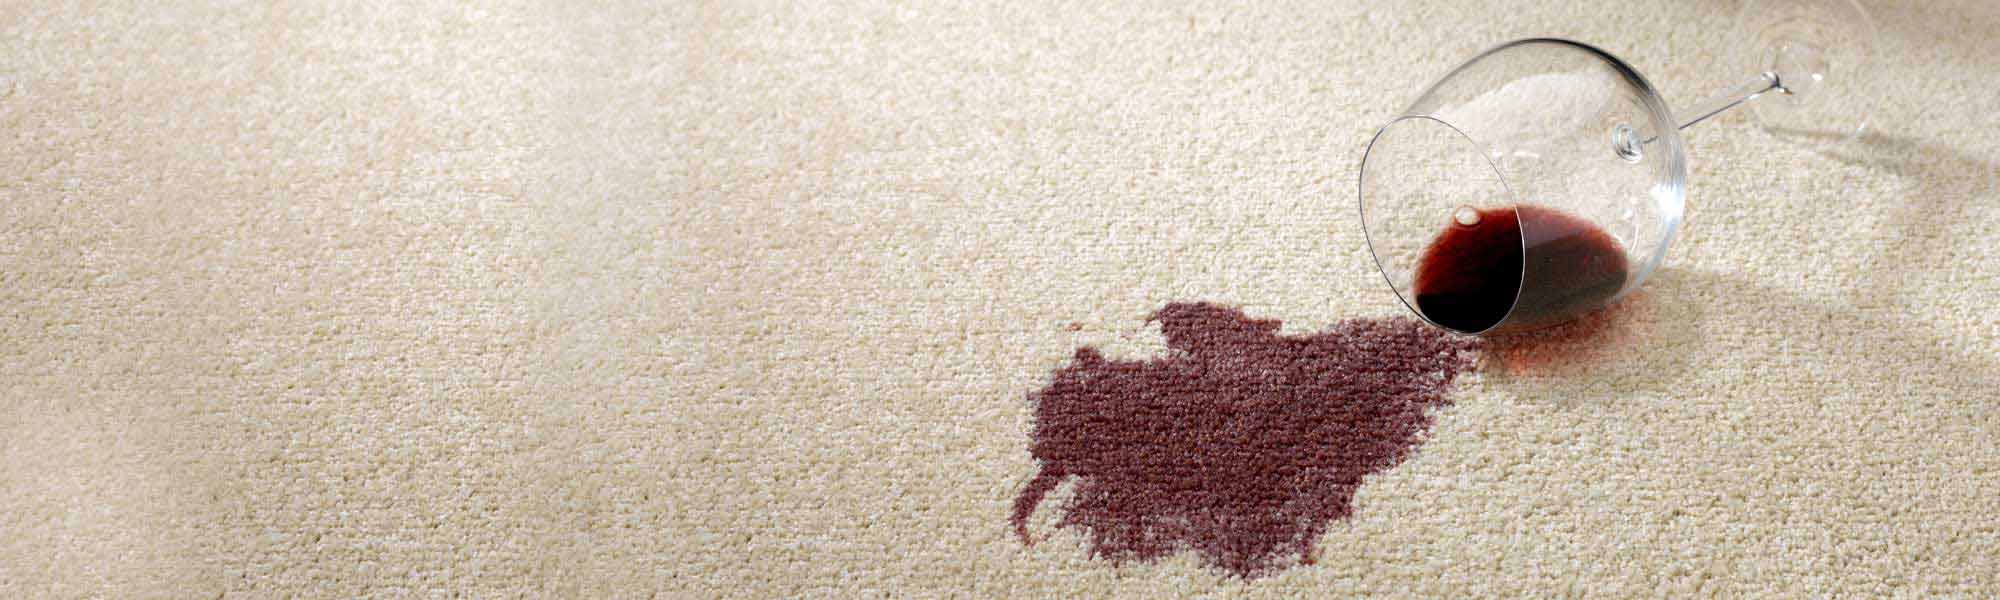 Professional Stain Removal Service by Mountaineer Chem-Dry